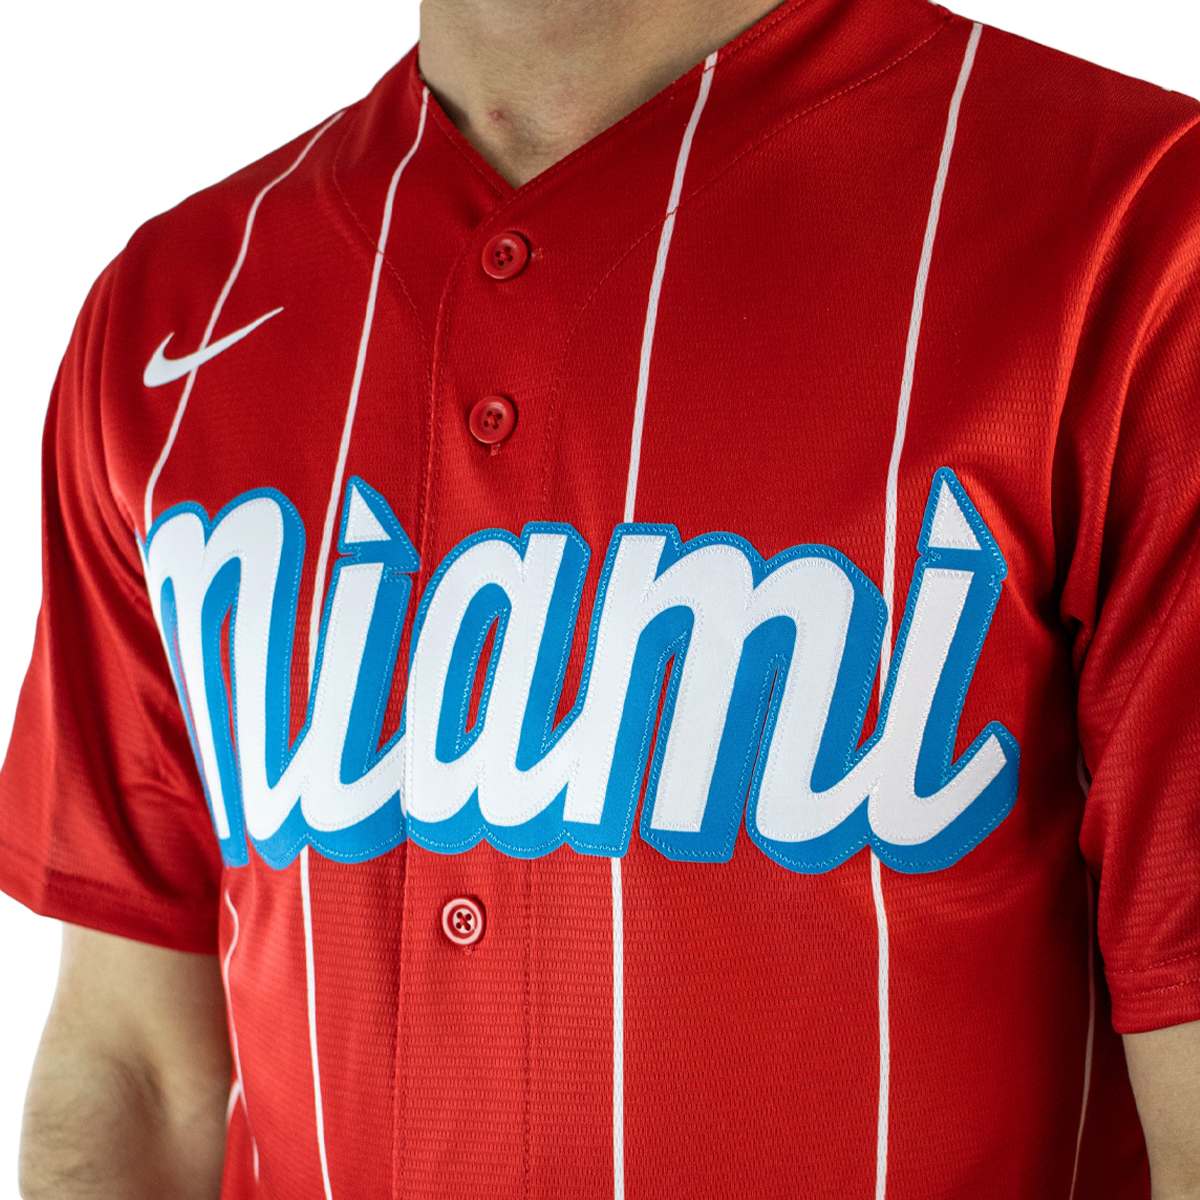 Nike Miami Marlins MLB Official Replica City Connect Jersey Trikot T770-03VR-MQM-KMG-